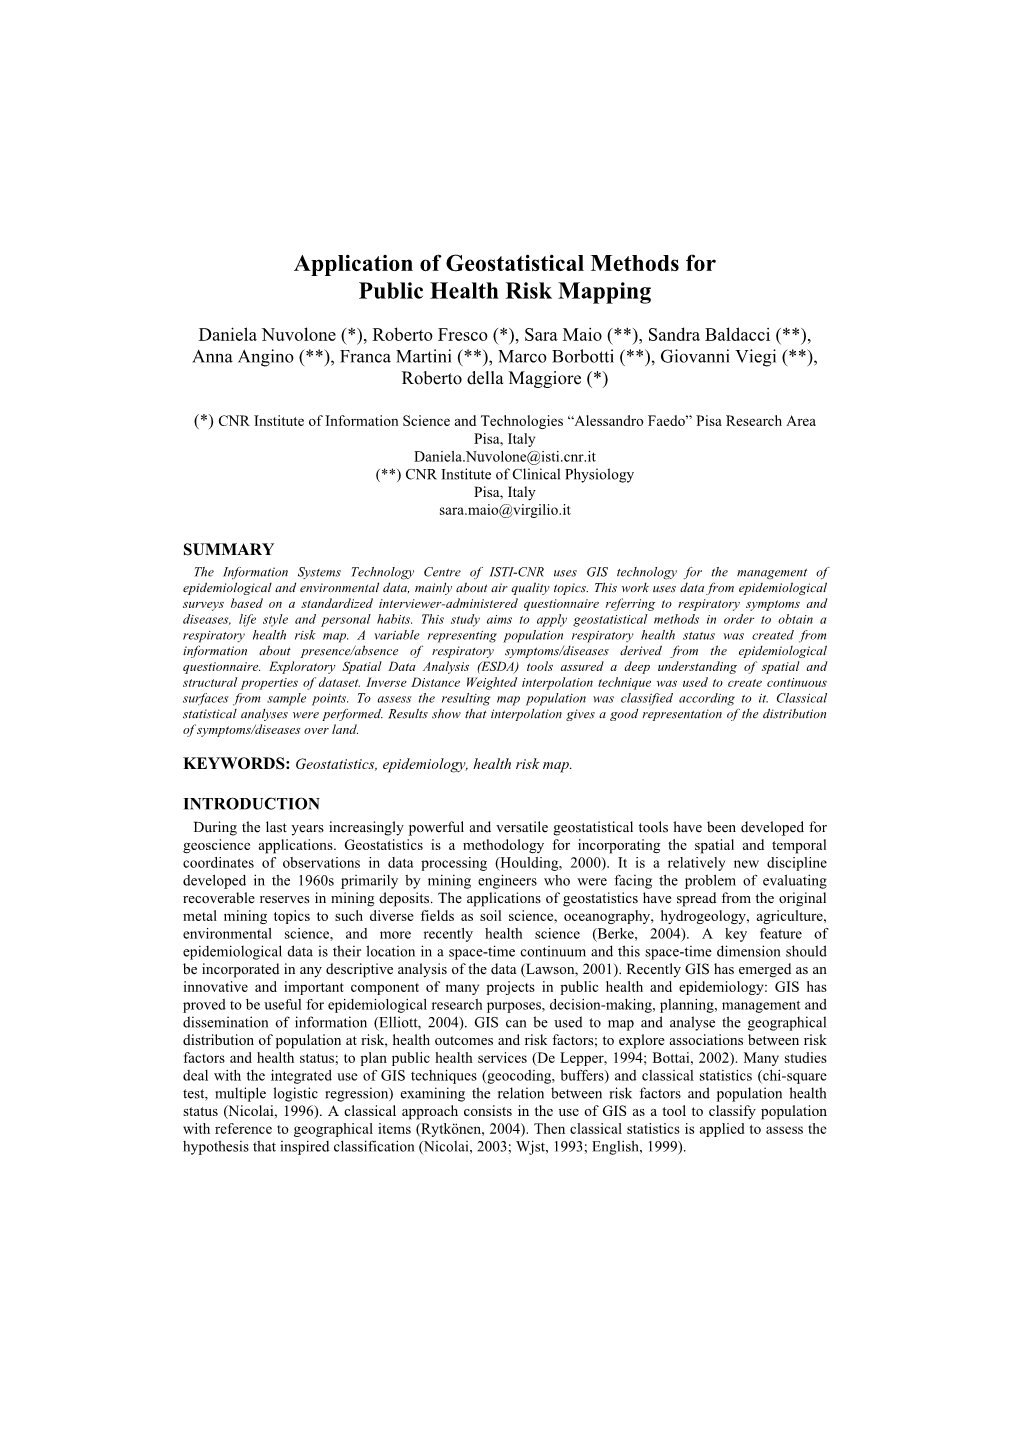 Application of Geostatistical Methods for Public Health Risk Mapping